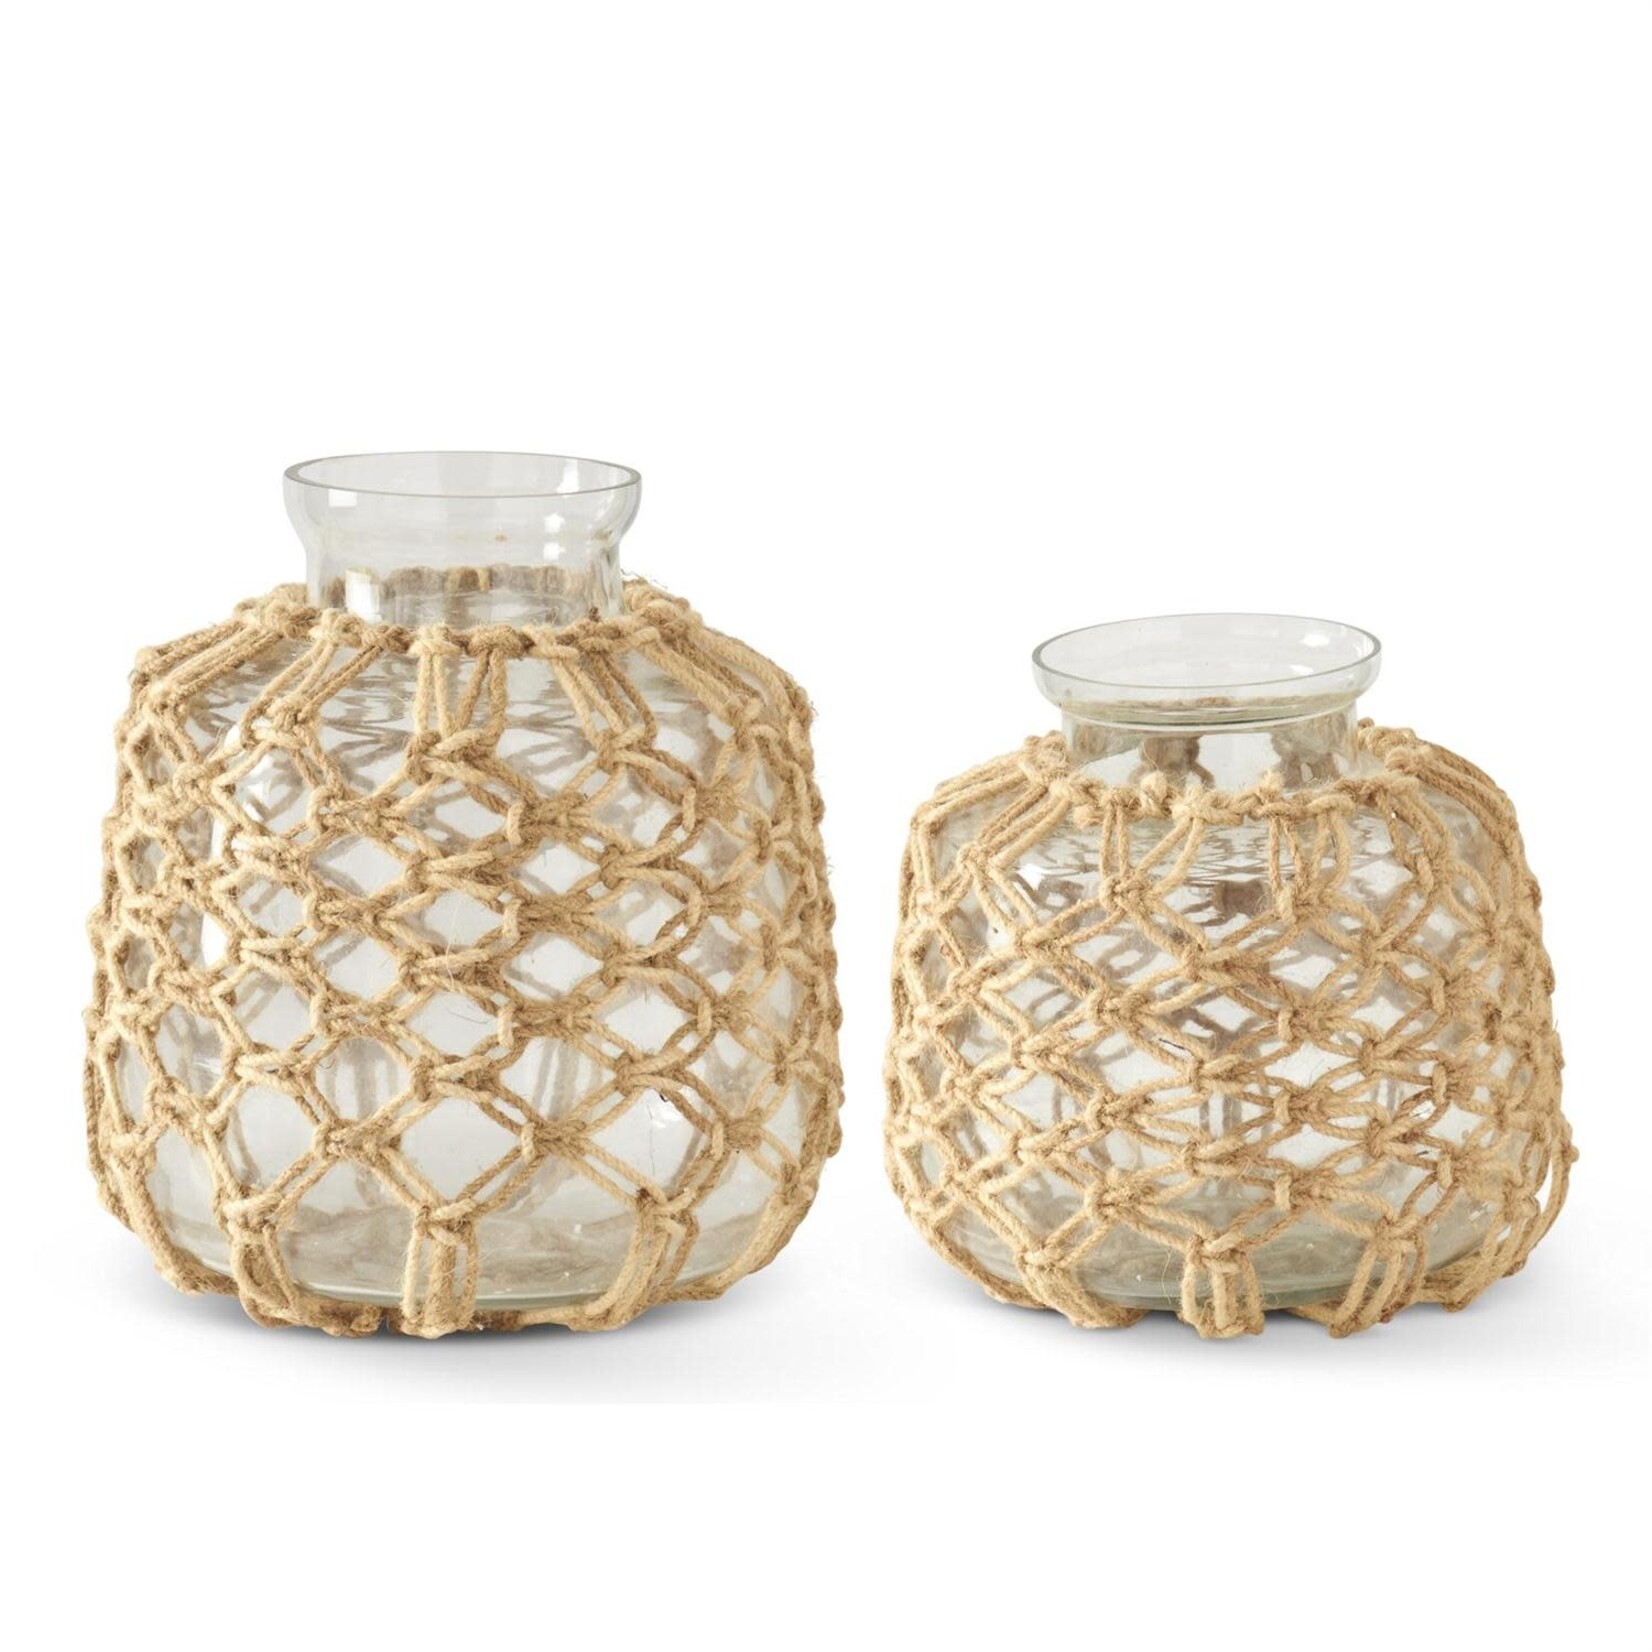 12.5 Inch Jute Net Wrapped Clear Glass Vase